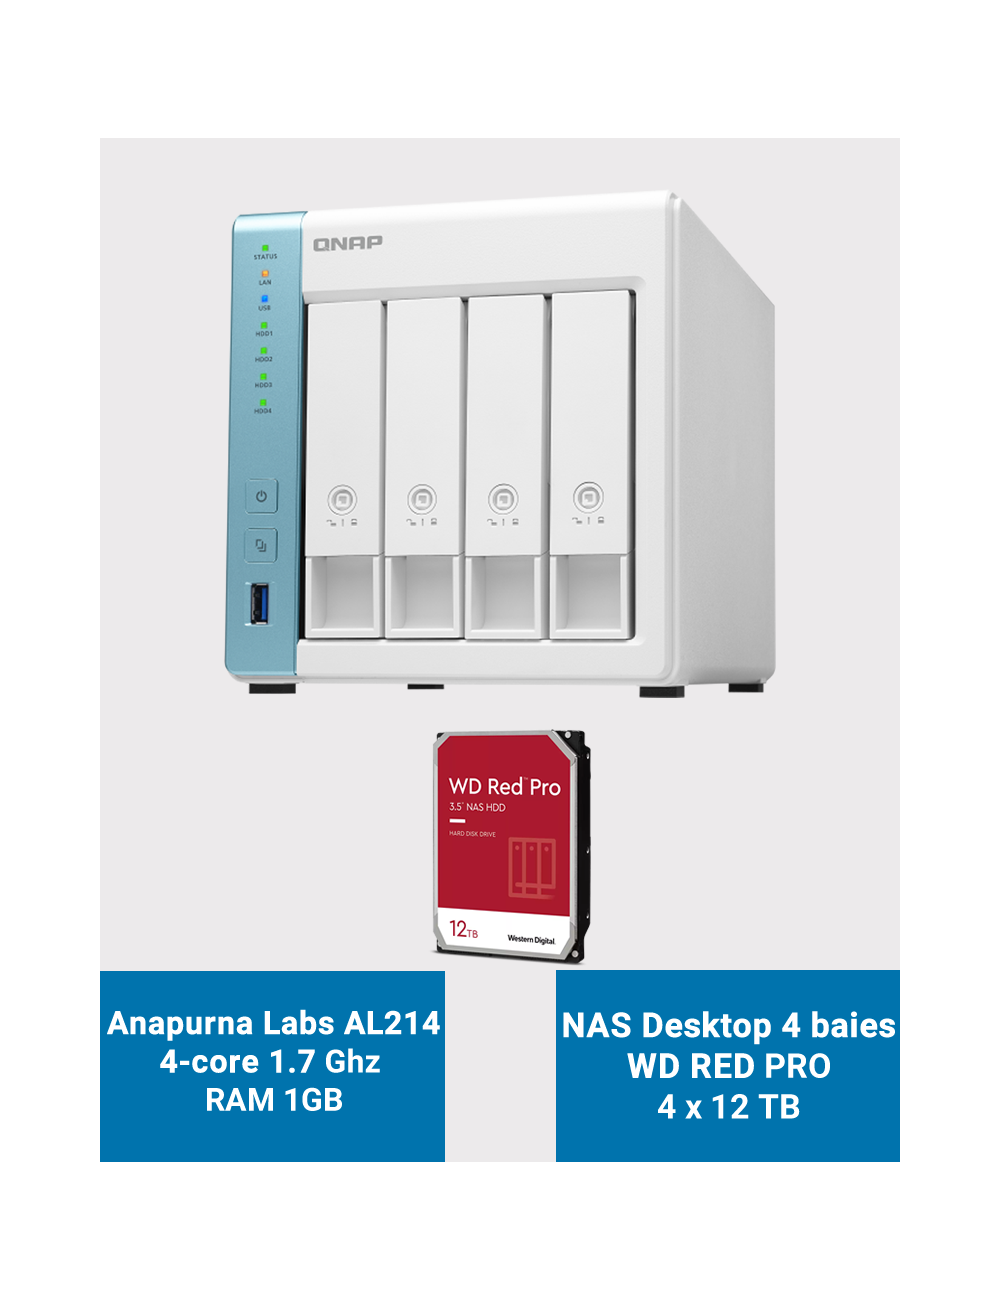 Qnap TS-431K Serveur NAS 4 baies WD RED PRO 48To (4x12To)